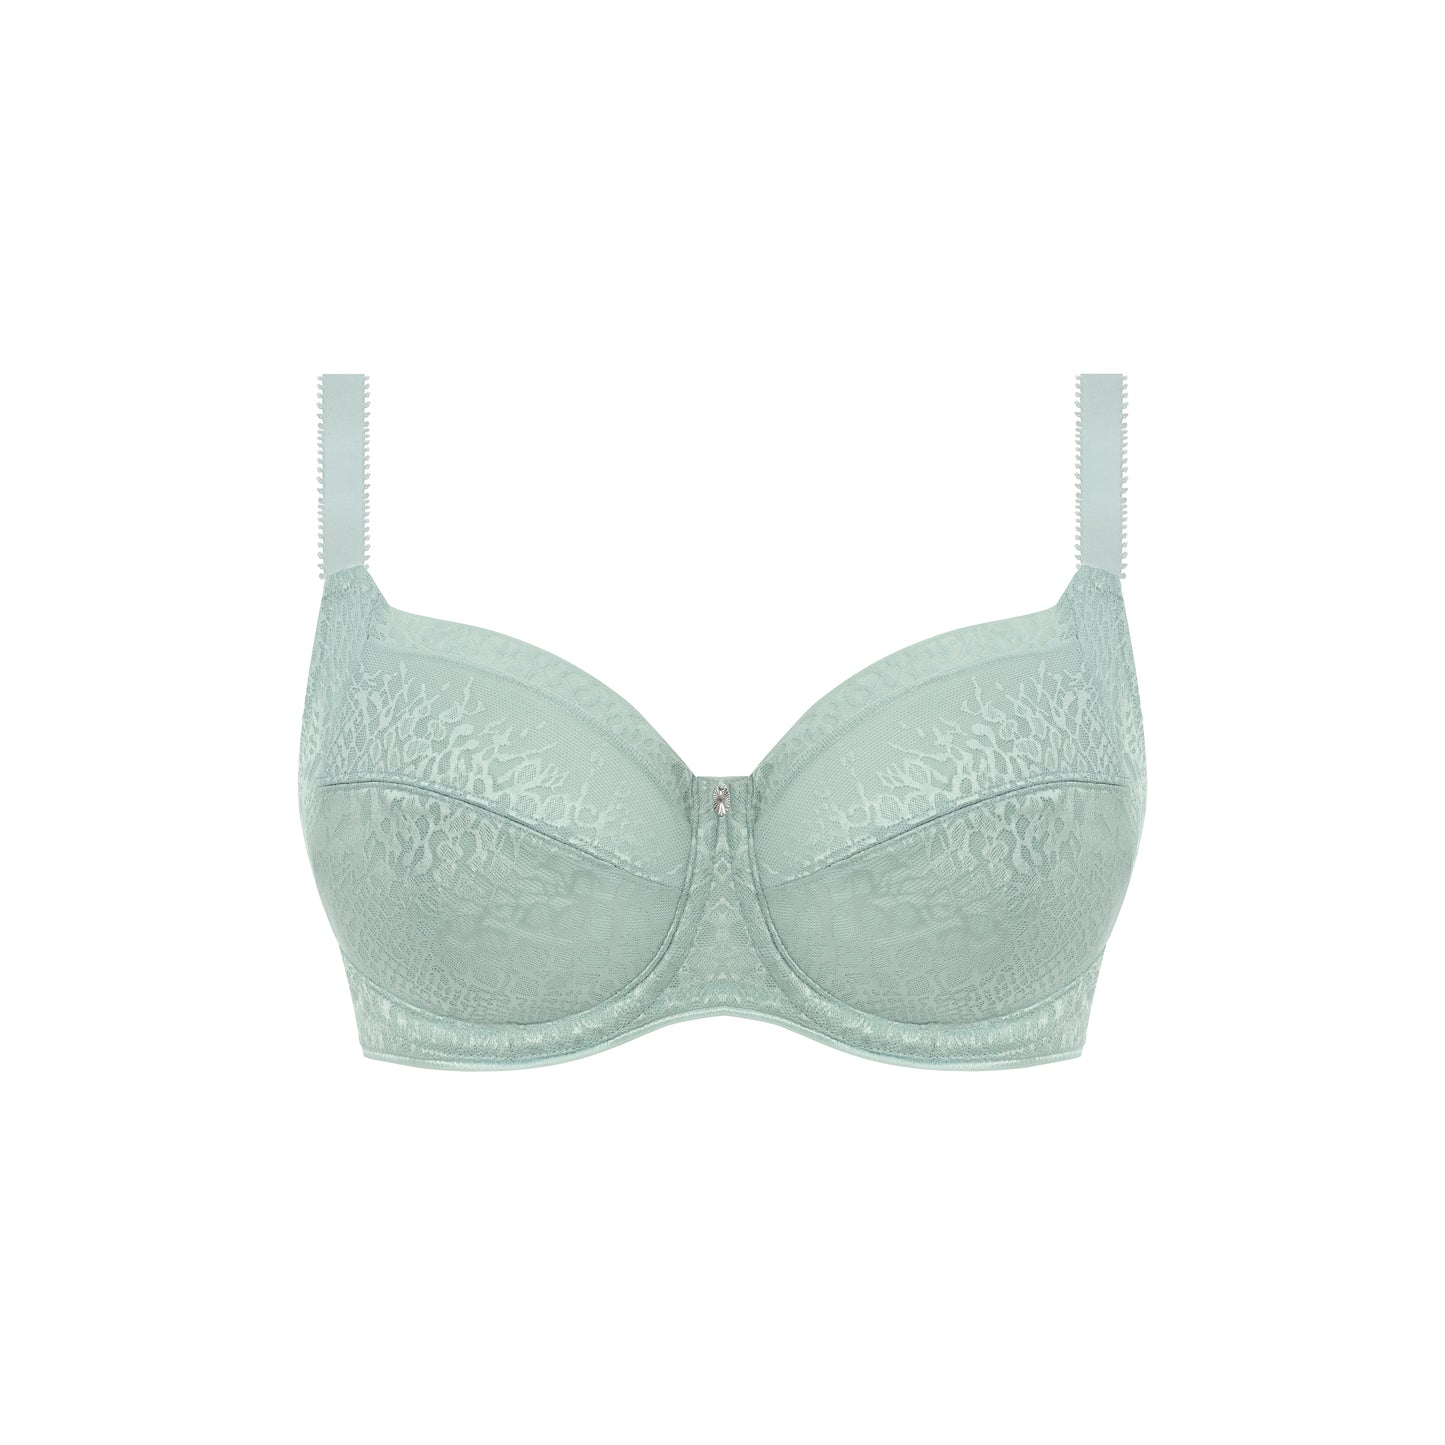 Envisage Underwired Full Cup Side Support Bra In Ice Blue - Fantasie